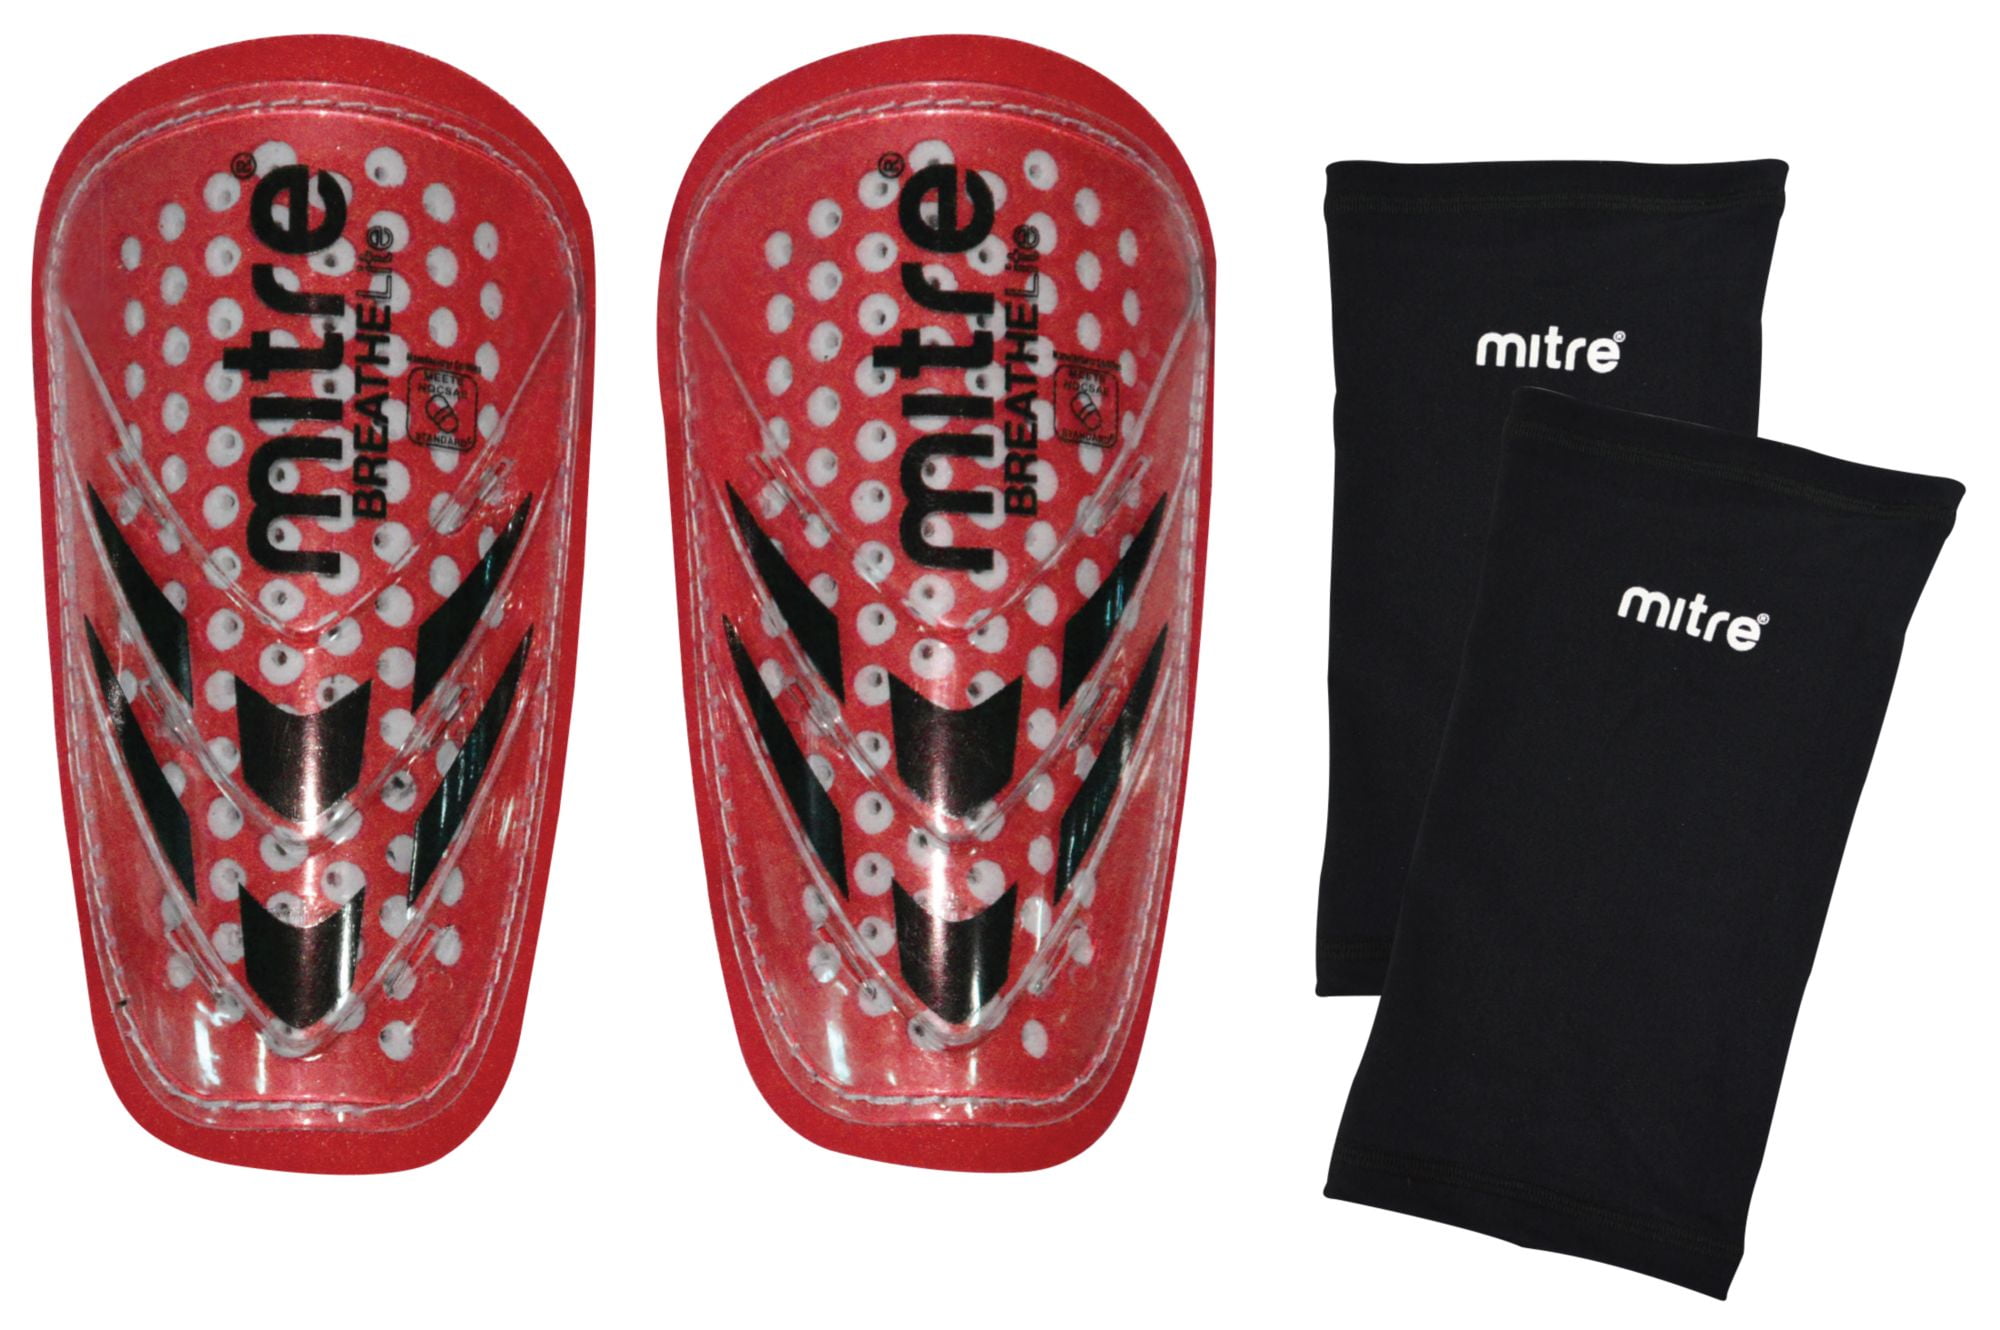 Details about   NEW Mitre Breathlite Shin Guard soccer for kids under 4"ft tall red   B-3 